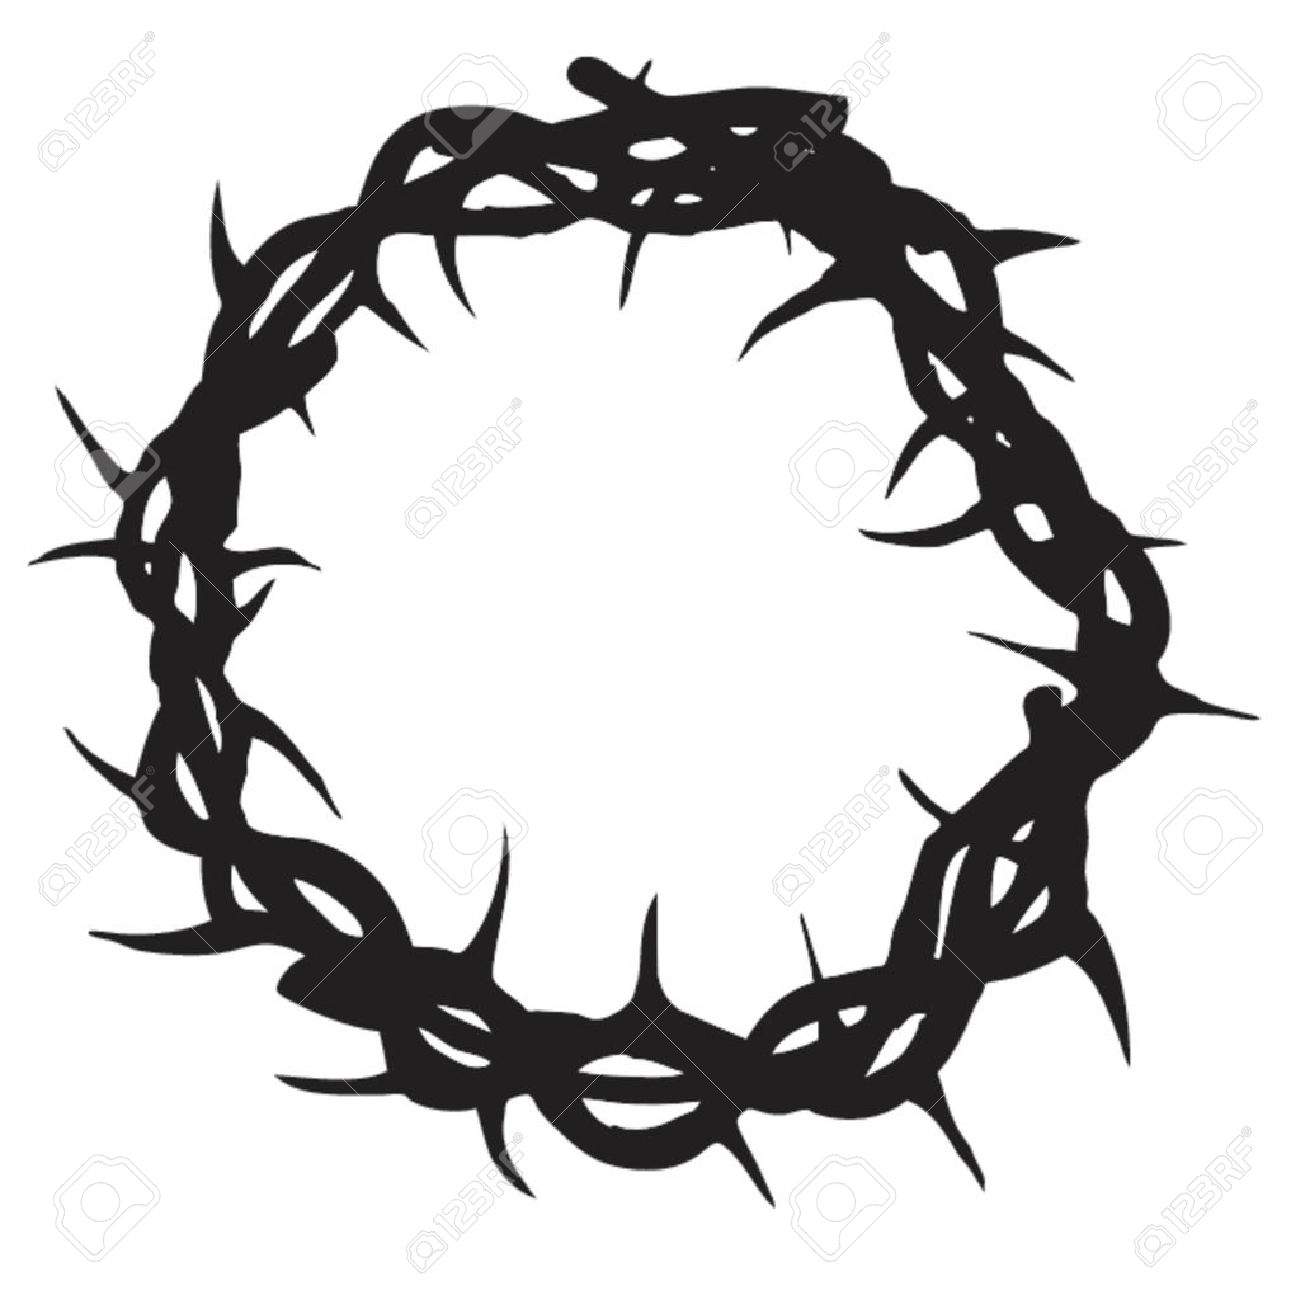 Search results for crown of thorns